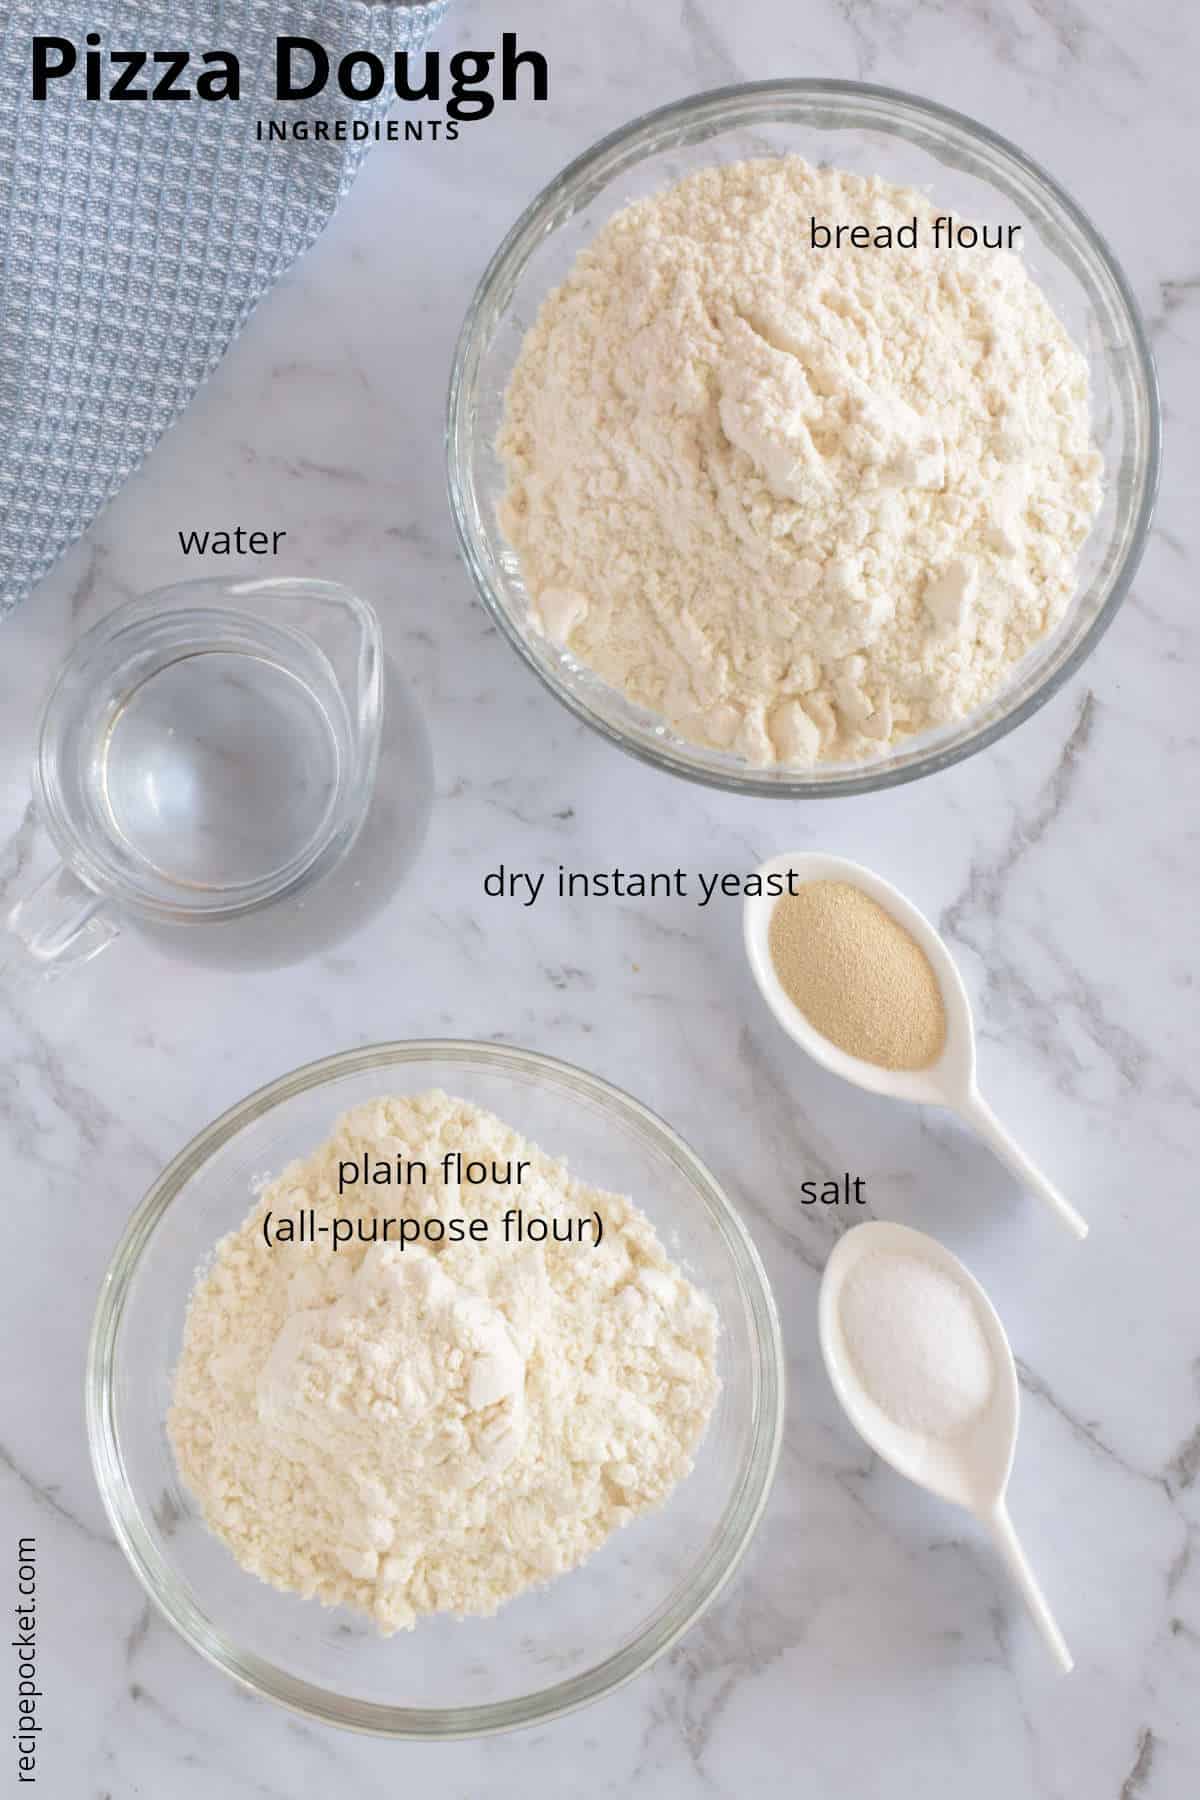 Image showing ingredients needed to make this recipe for pizza dough.